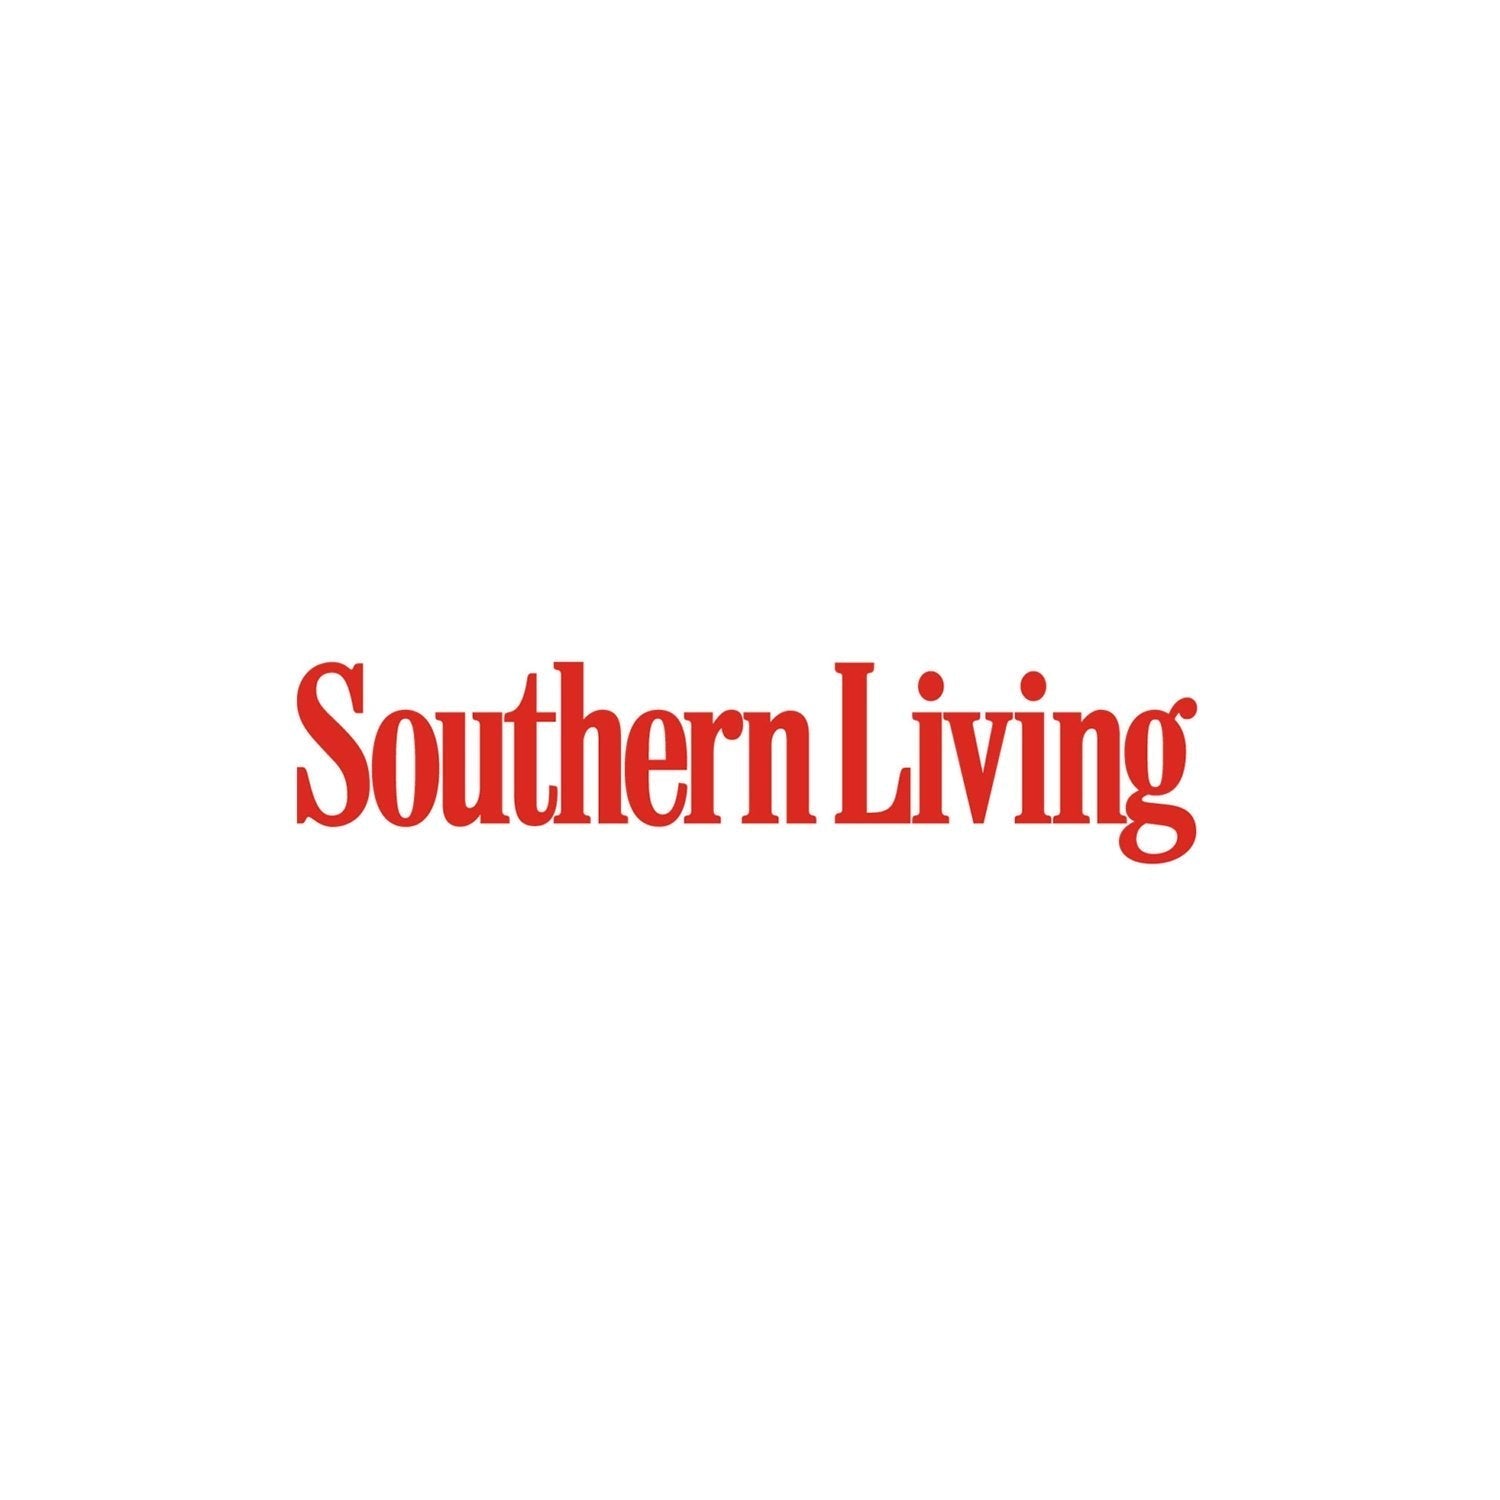 🏡Southern Living Editors Give Their Suggestions for Healthy Growing Hair - SAVE ME FROM